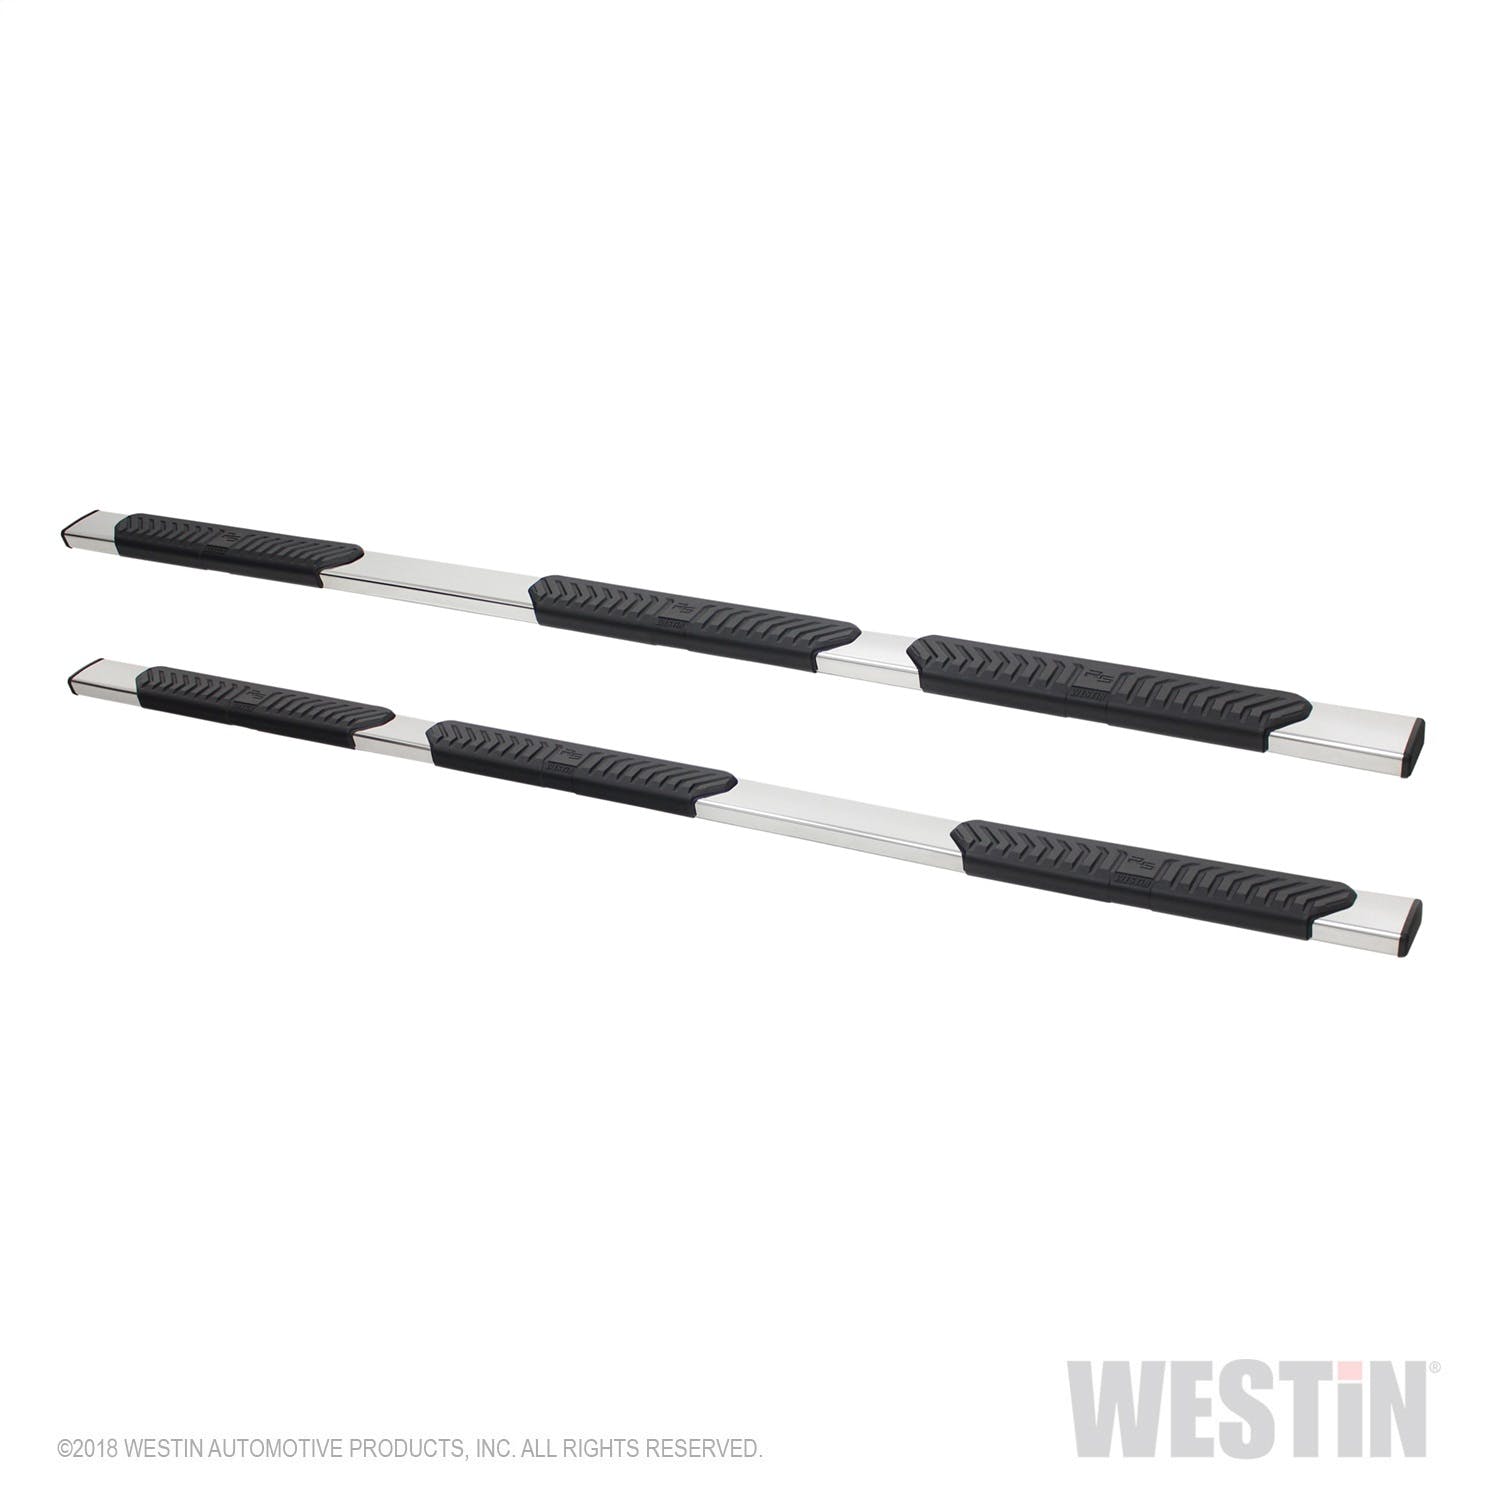 Westin Automotive 28-534010 R5 M-Series Wheel-to-Wheel Nerf Step Bars Polished Stainless